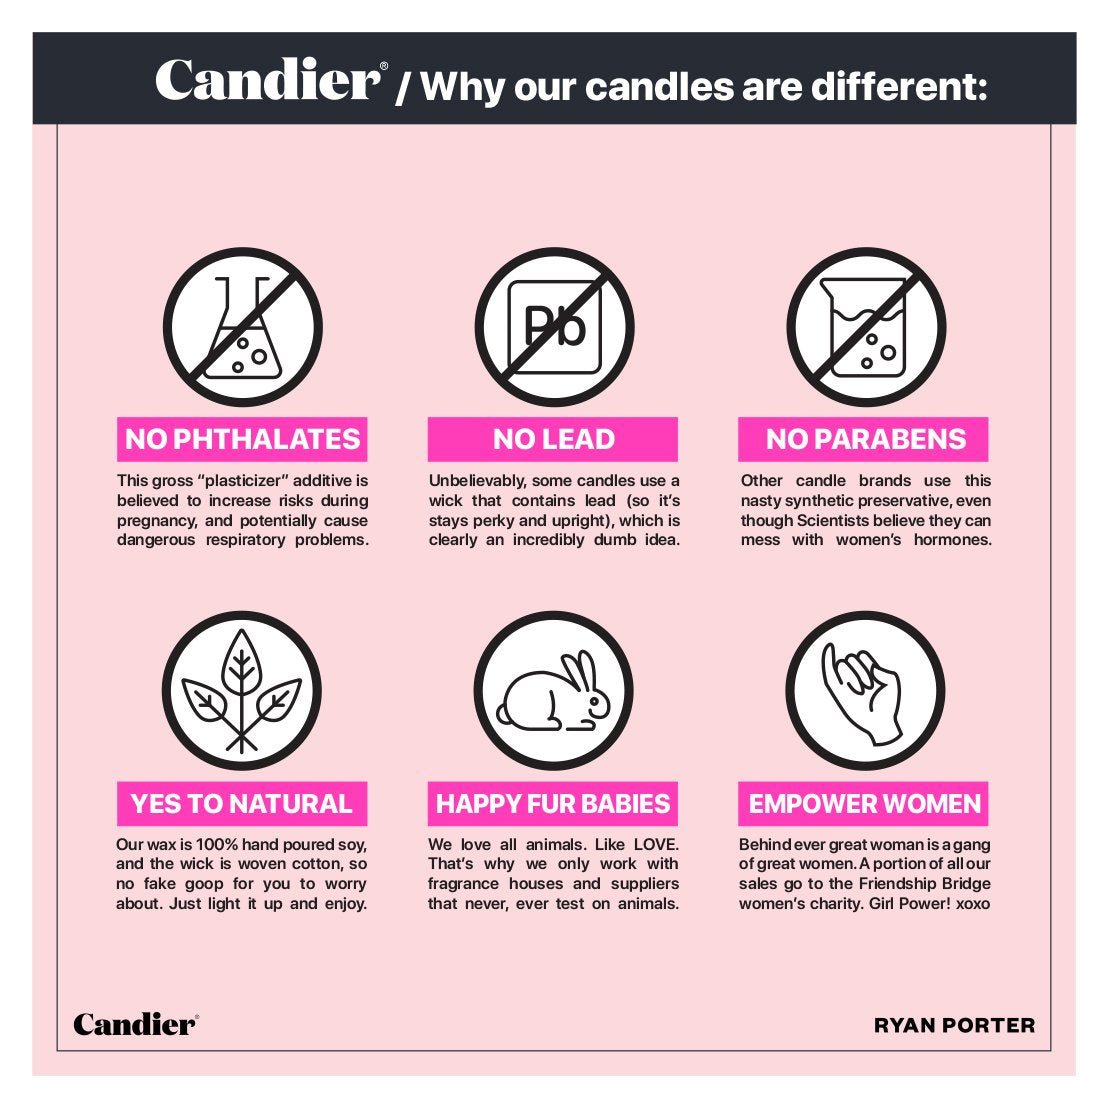 Bags & Wallets WHO RUN THE WORLD? MOMS. CANDLE